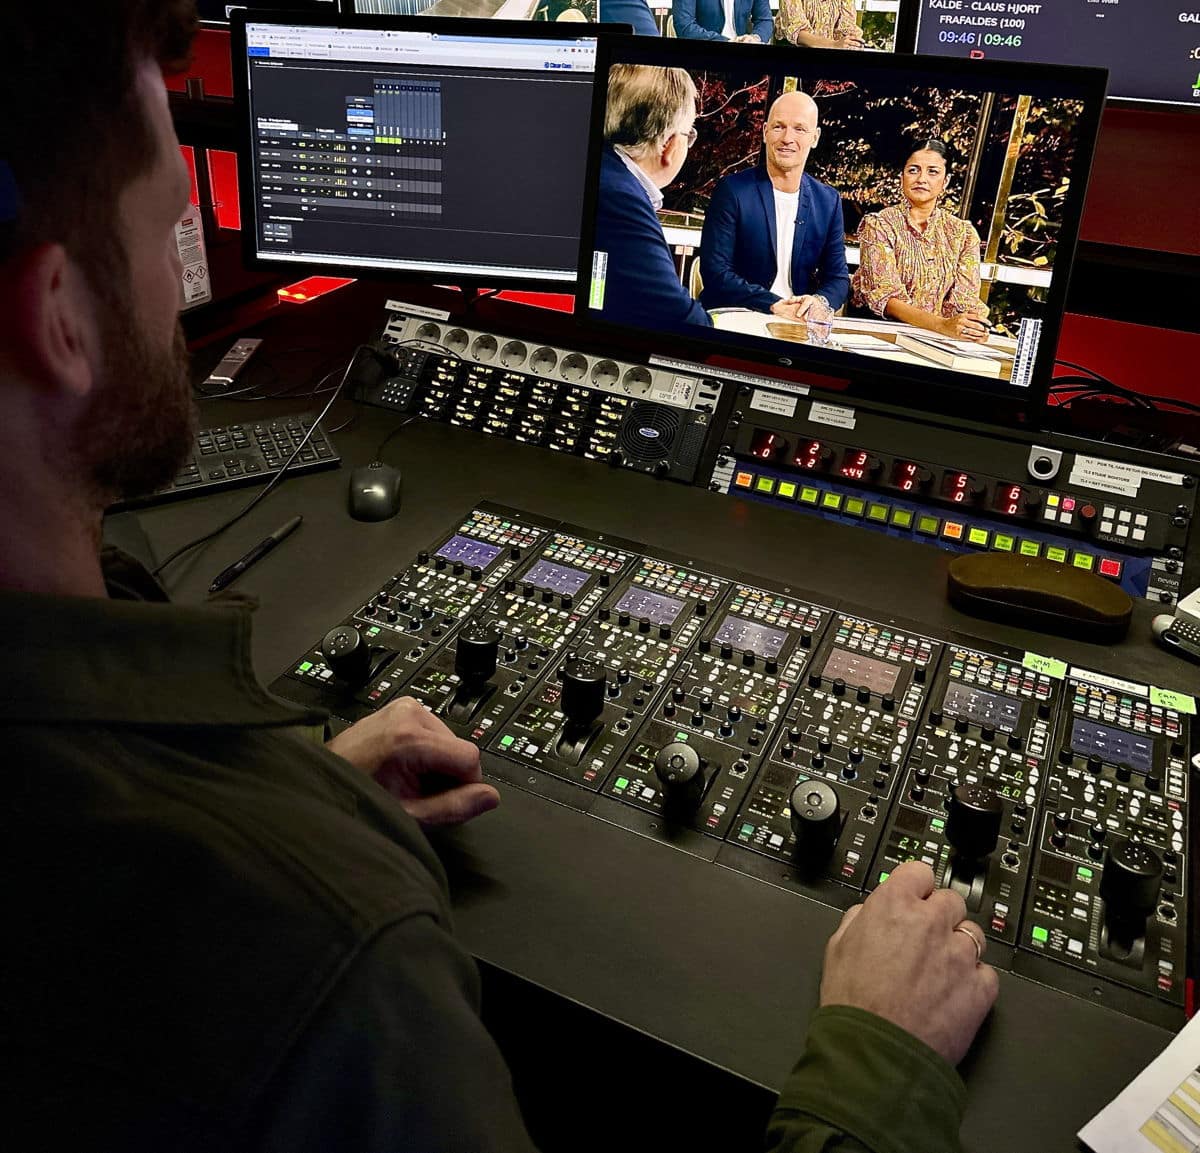 In the TV2 Denmark studio, an NPN was created, using Cucumore’s 5G Litecore technology, working in tandem with Node-H’s RAN